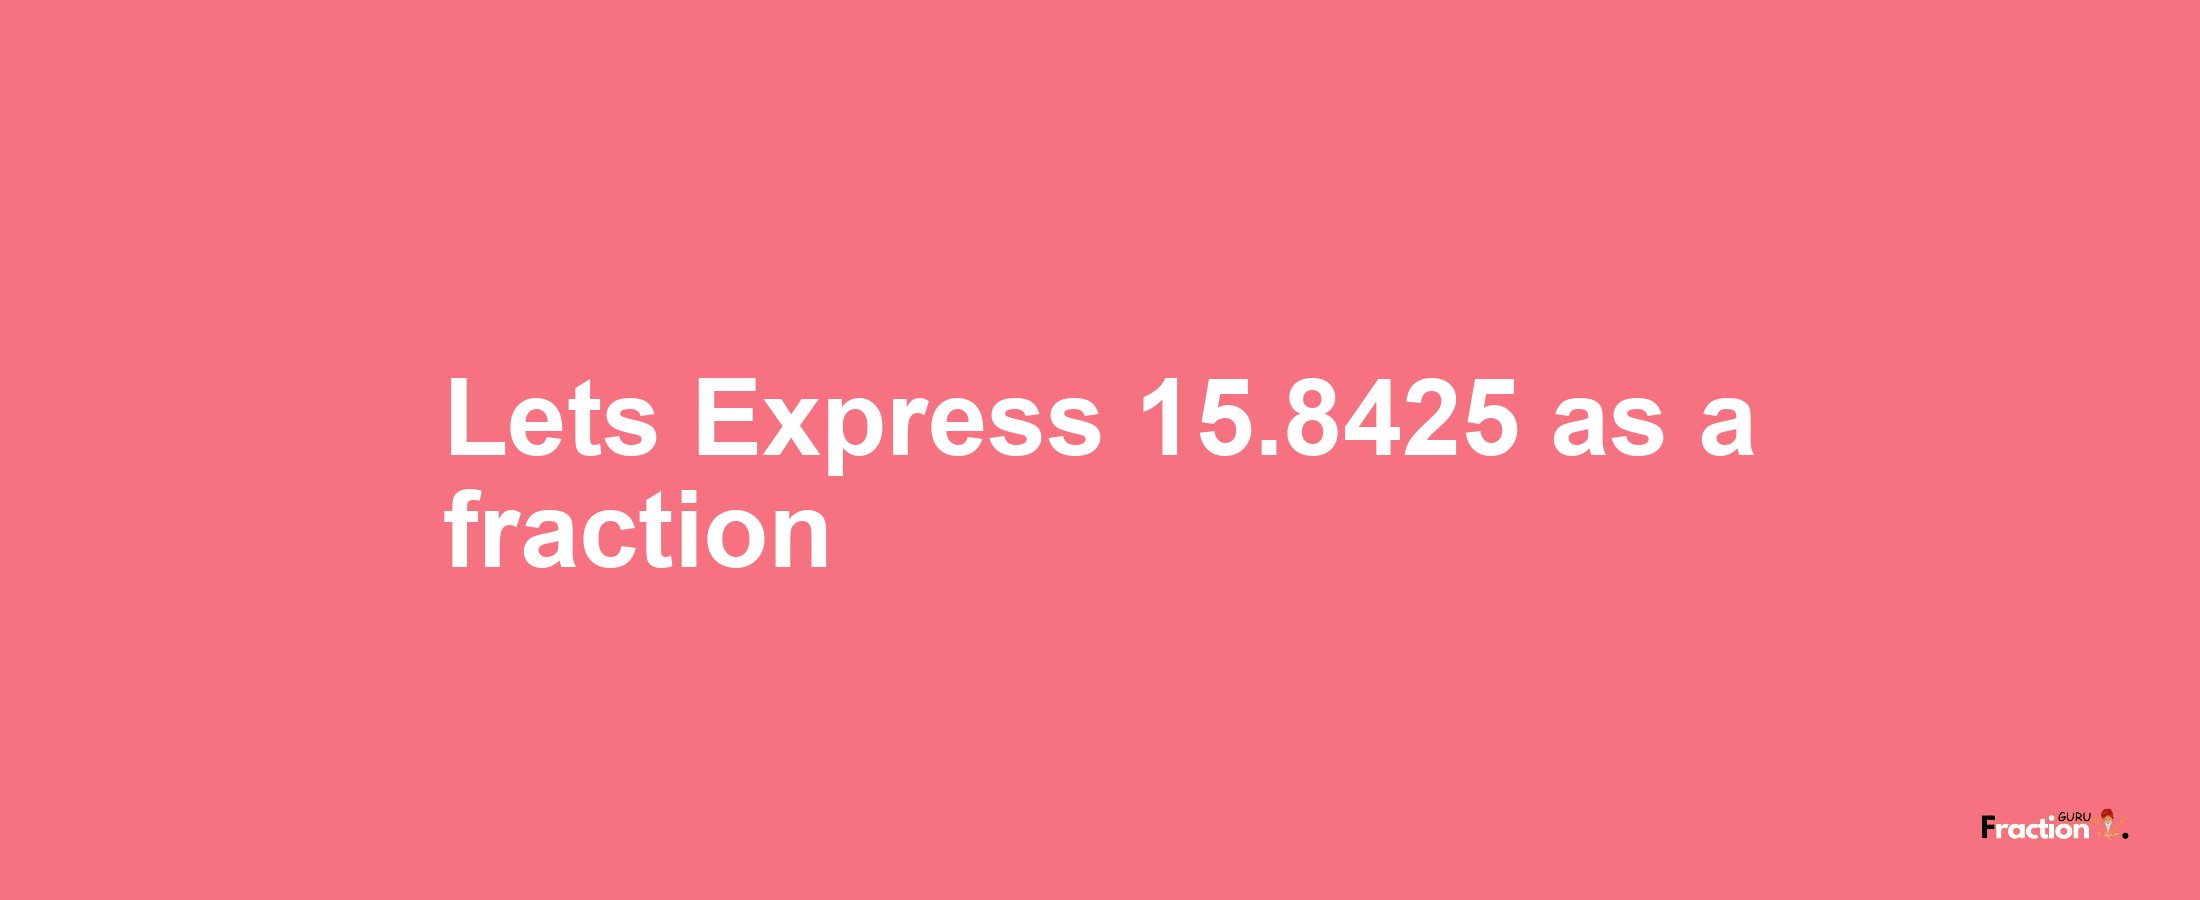 Lets Express 15.8425 as afraction